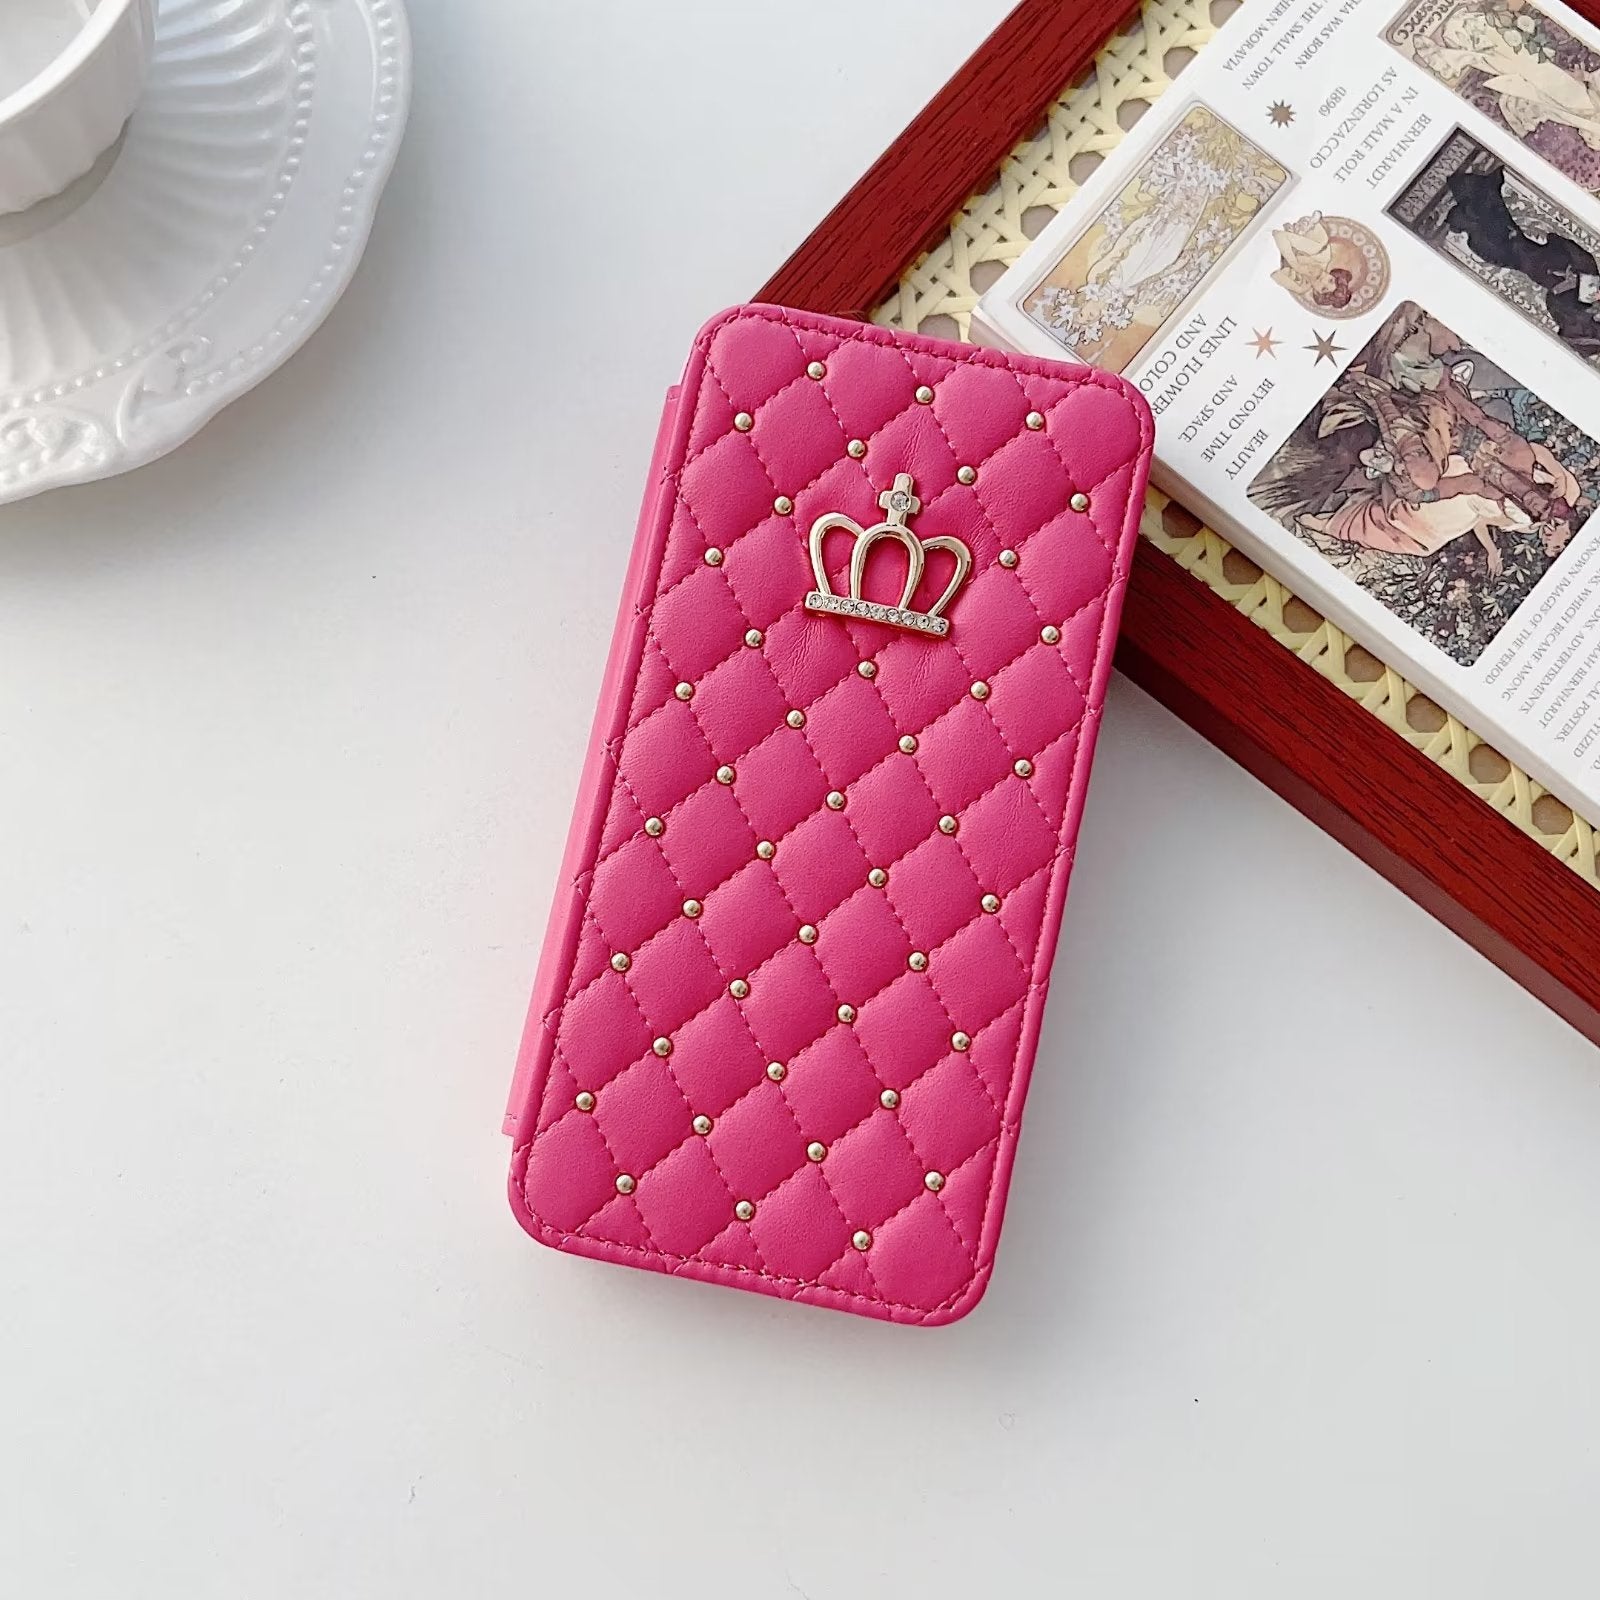 Crown Flip Wallet iPhone Case-Fonally-For iPhone 7-Rose Pink-